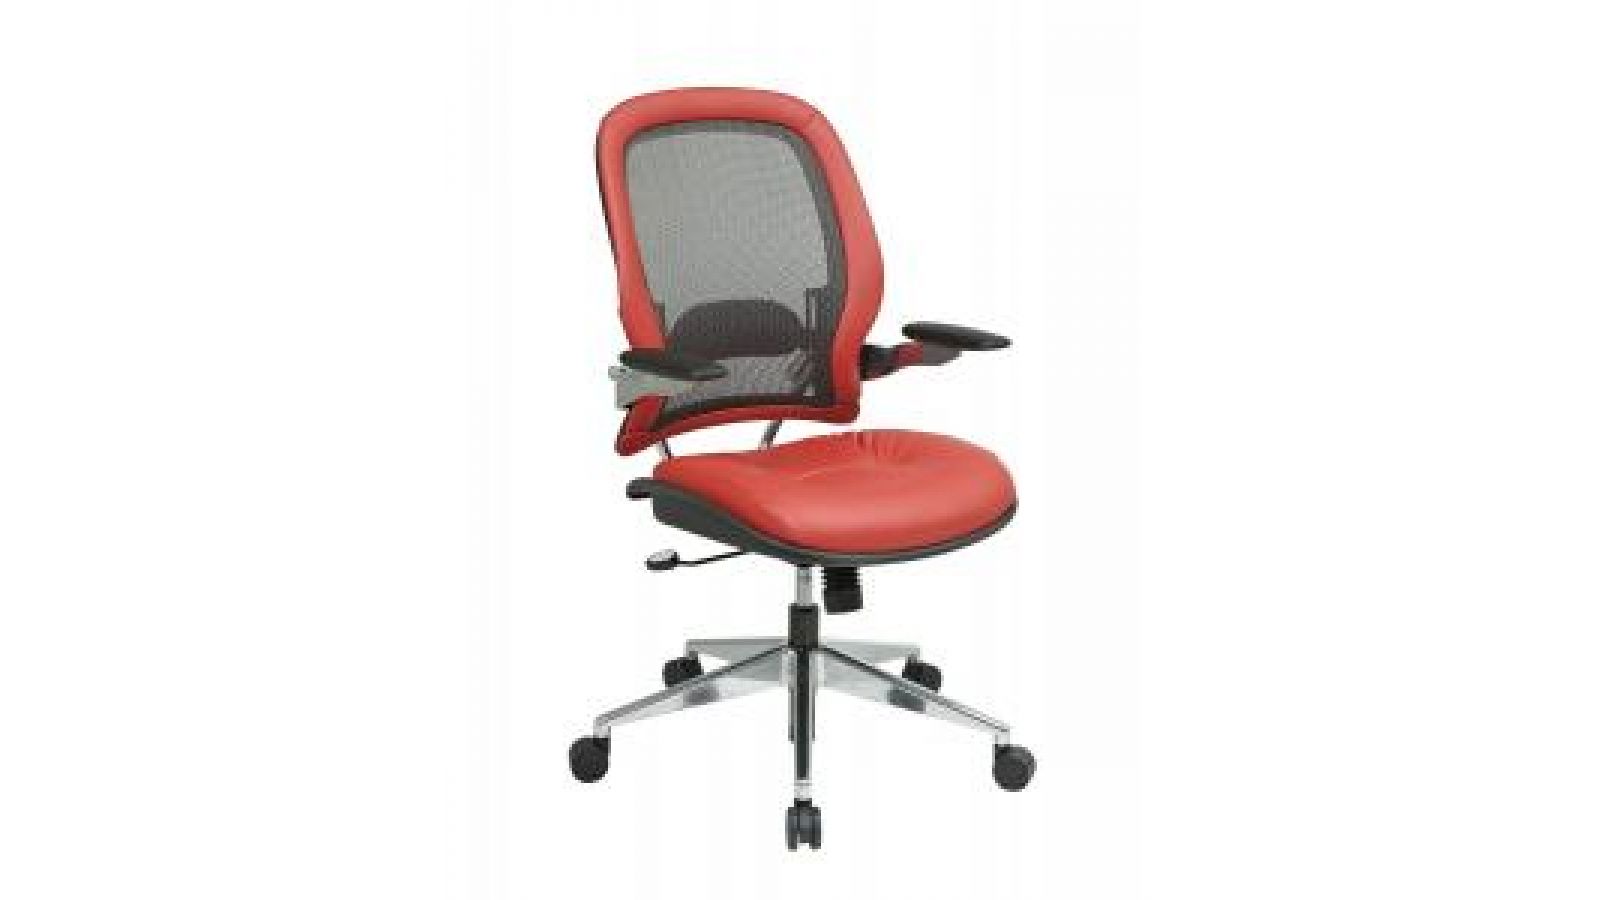 SPACE 335 Series Manager's Chair